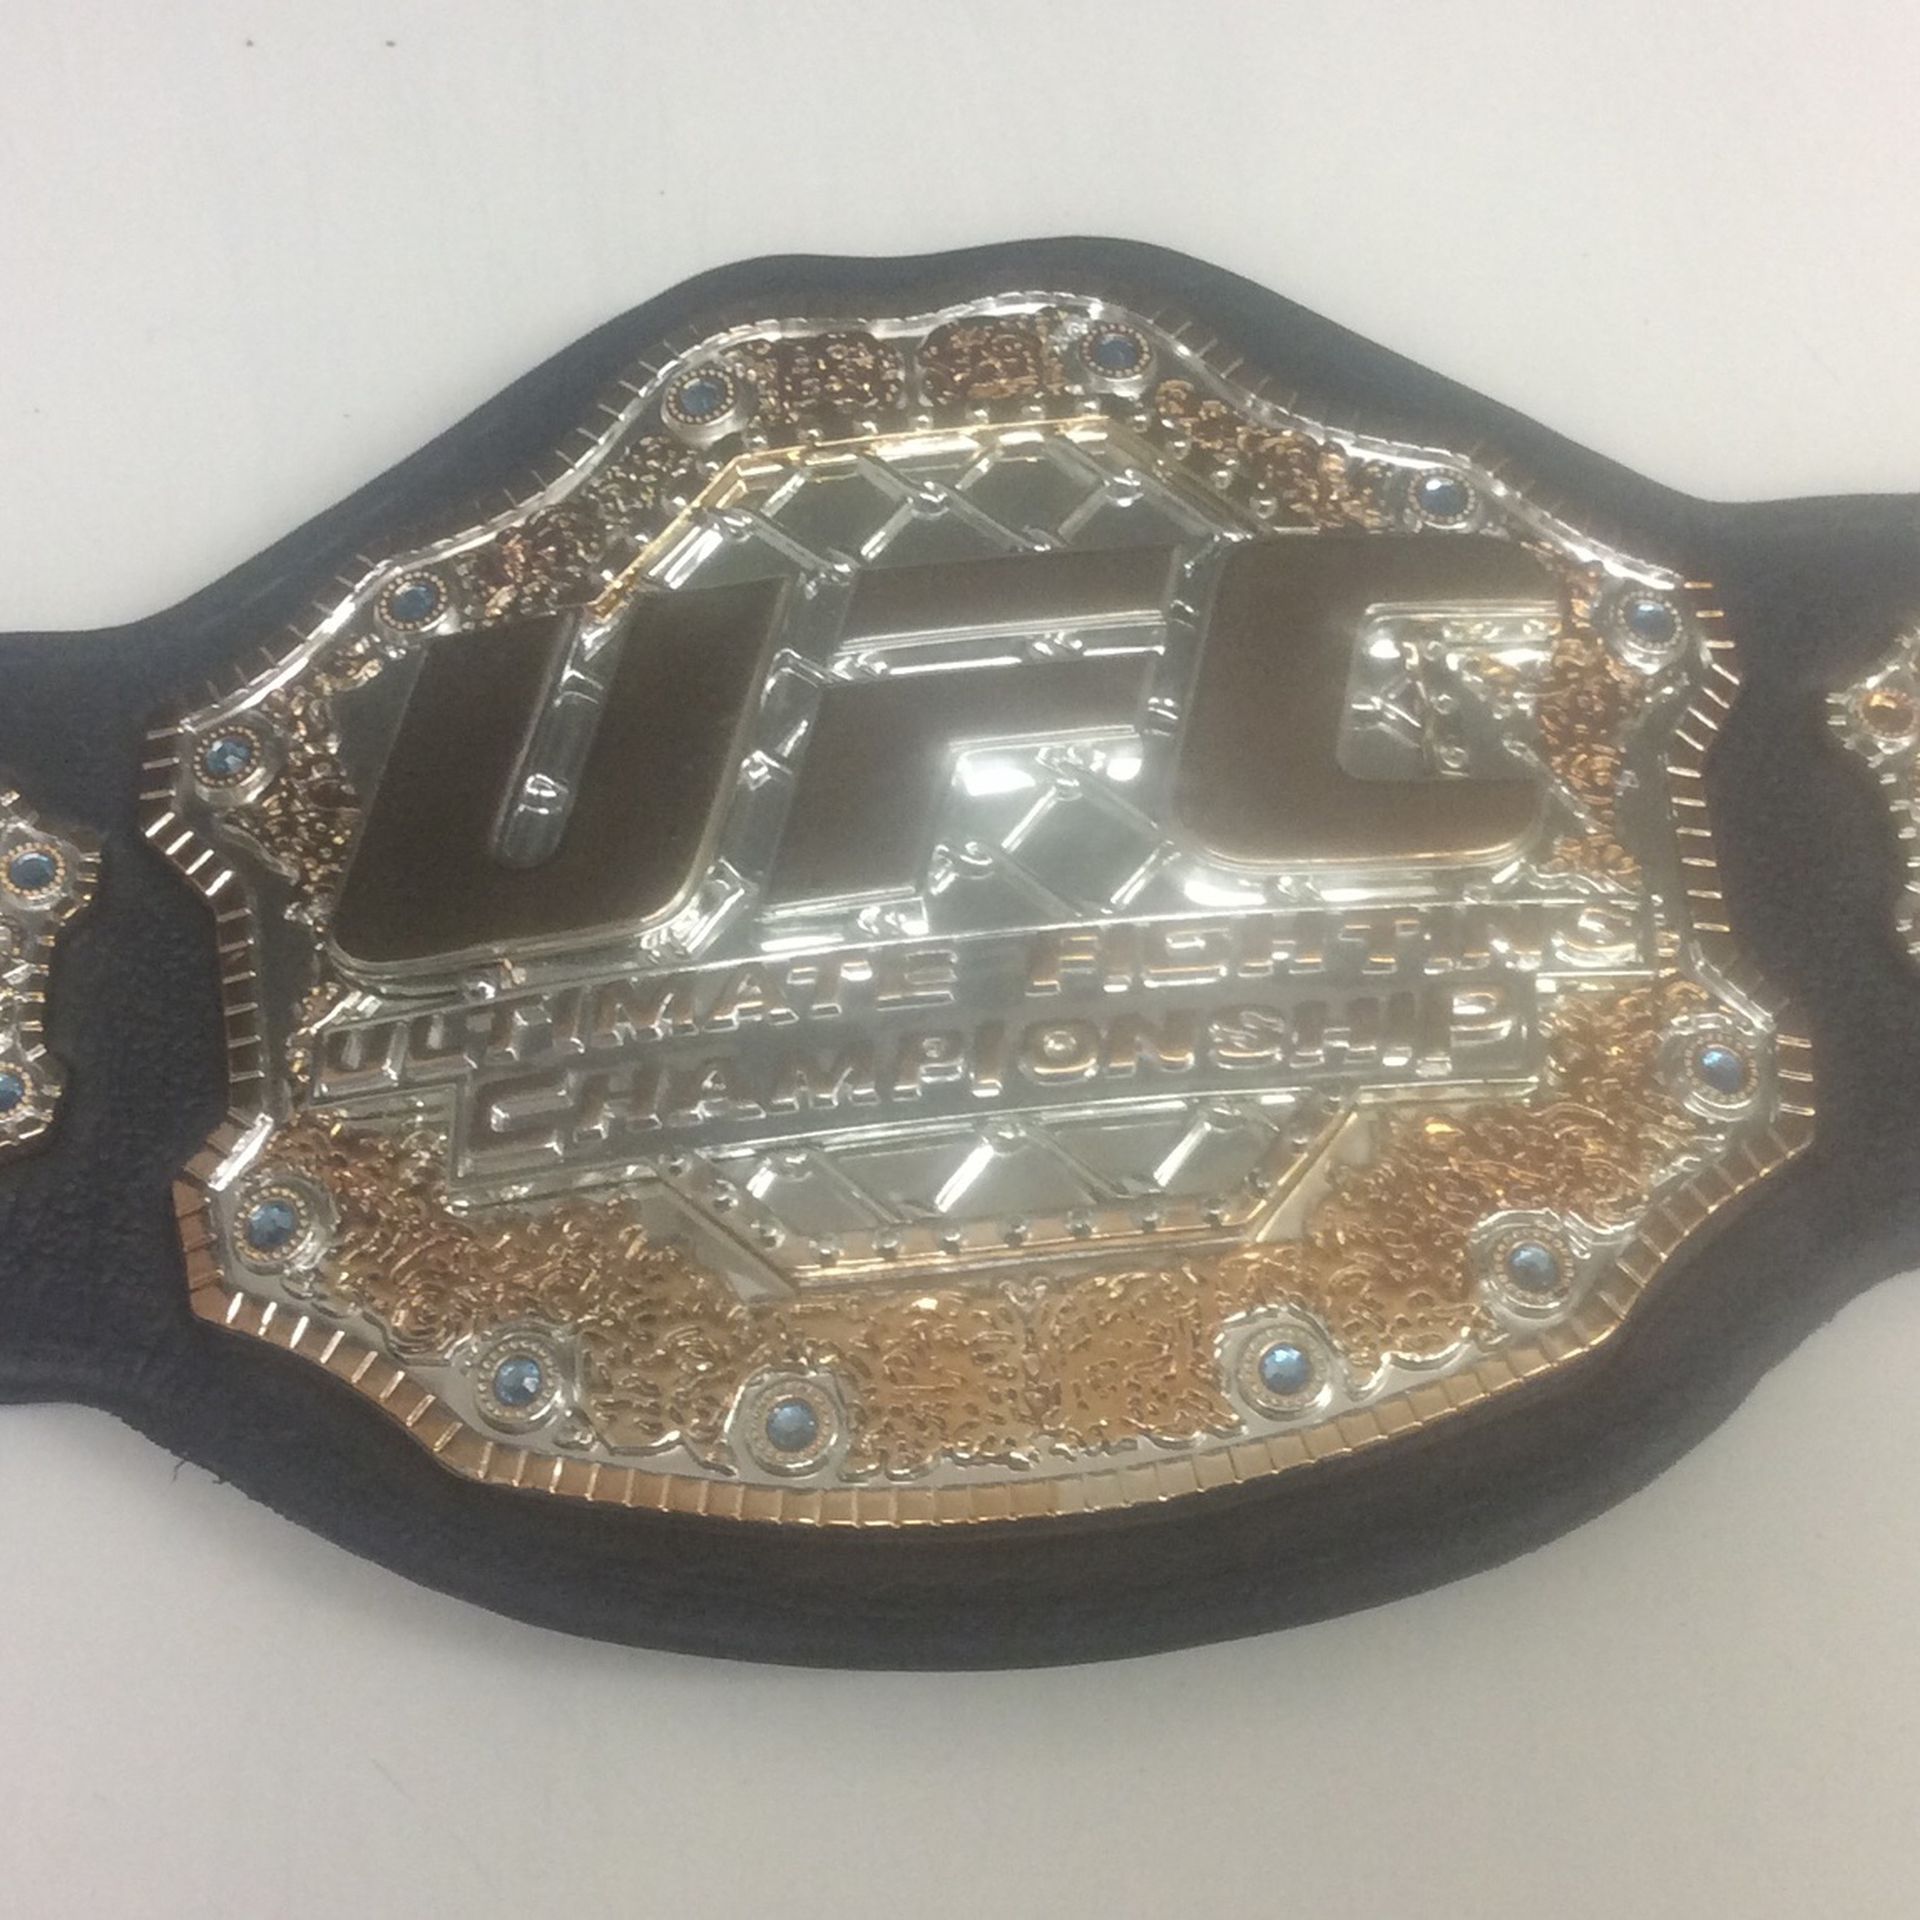 Toy Championship Belt For $11